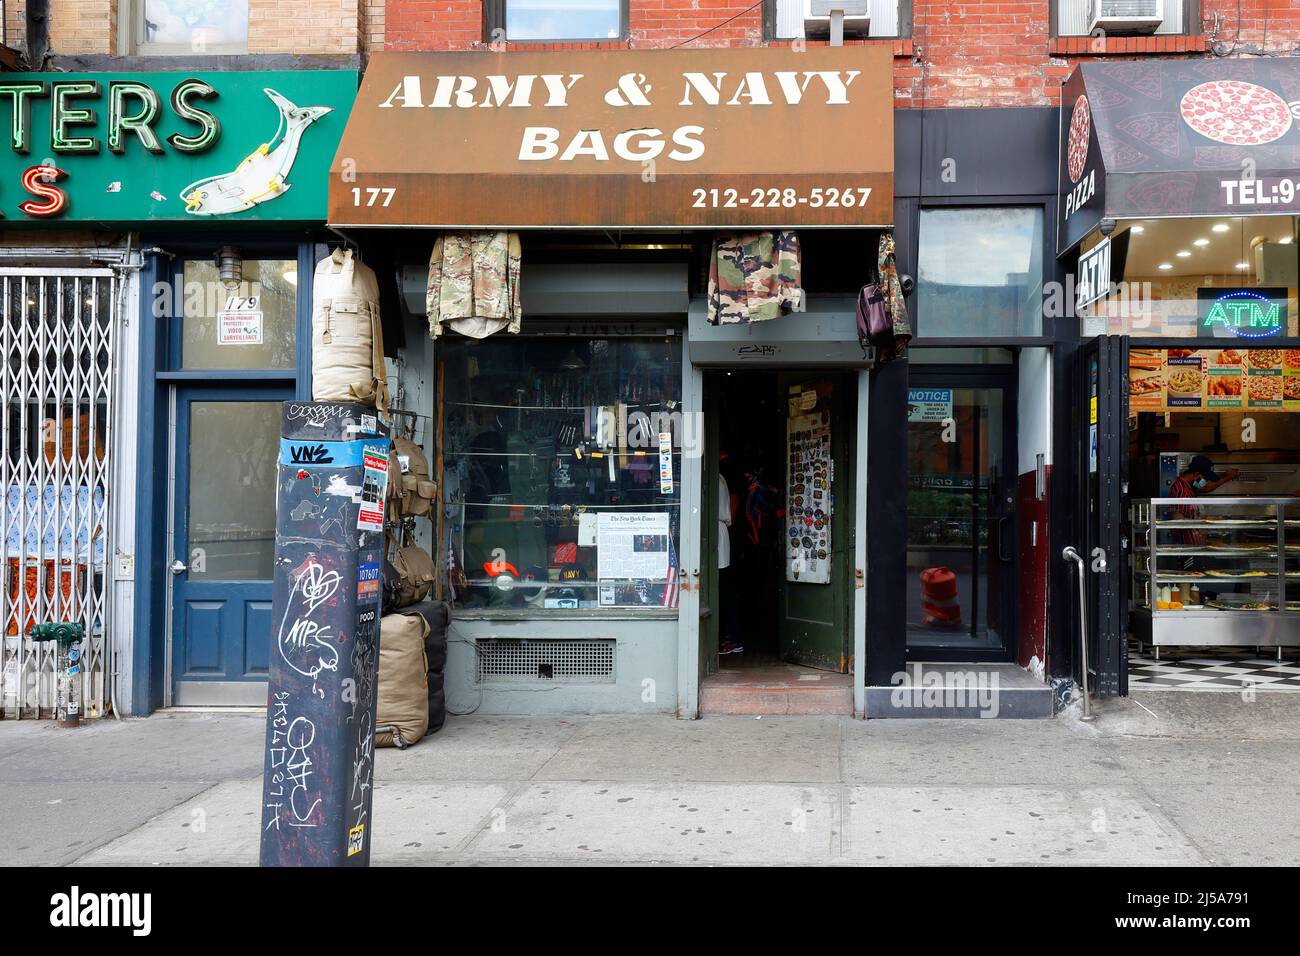 Army & Navy Bags, 177 E Houston St, New York, NY. exterior storefront of a clothing and surplus store in the Lower East Side in Manhattan. Stock Photo